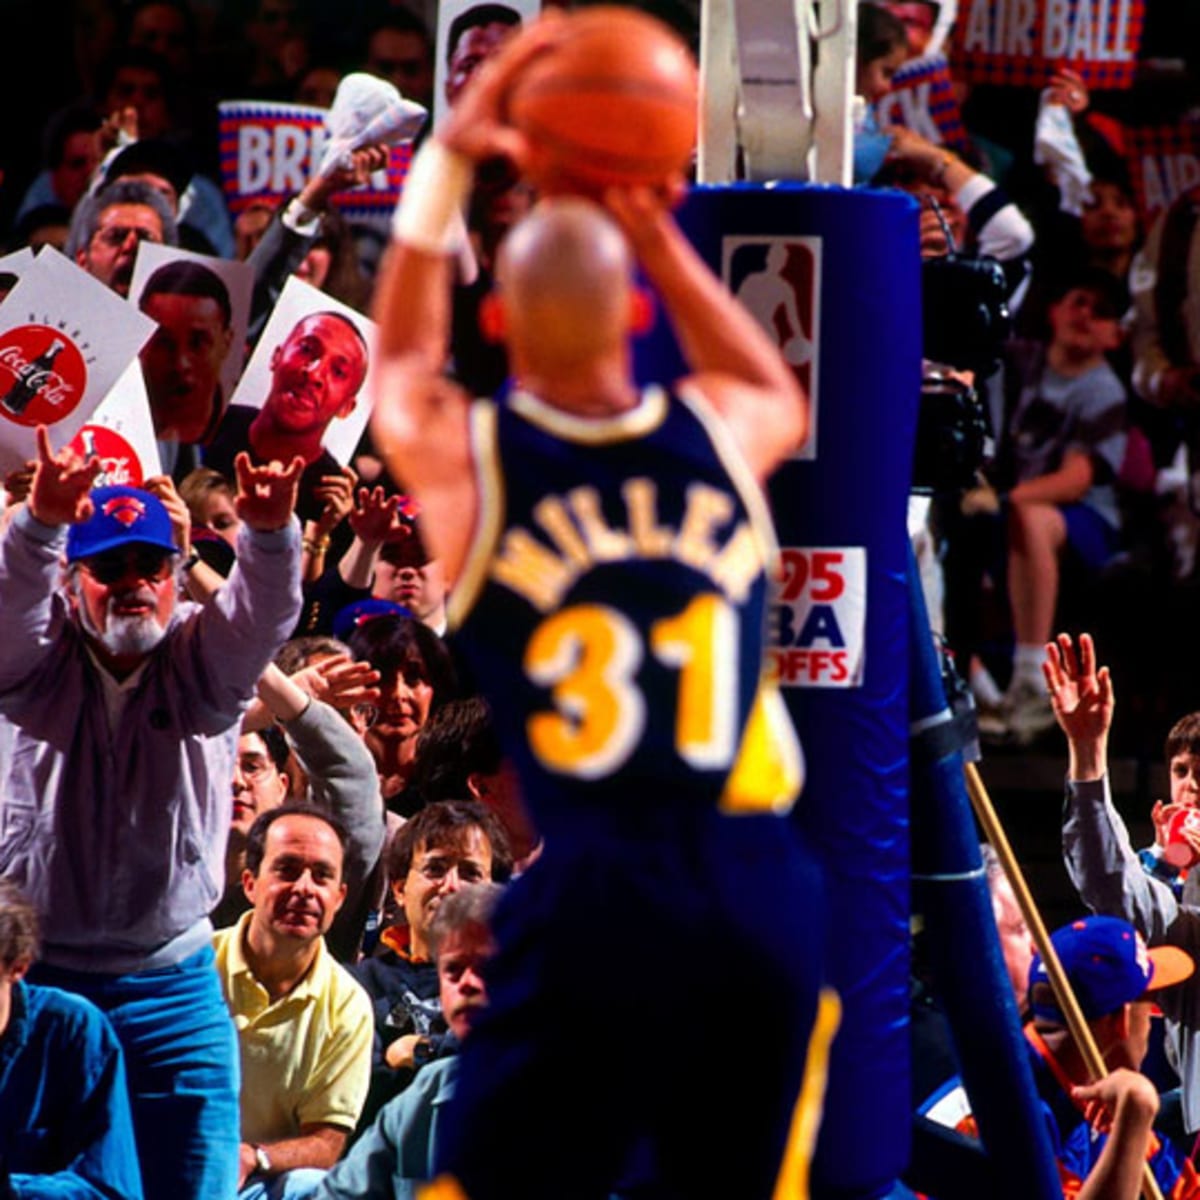 24th anniversary: Reggie Miller's 8 points in 9 seconds game vs